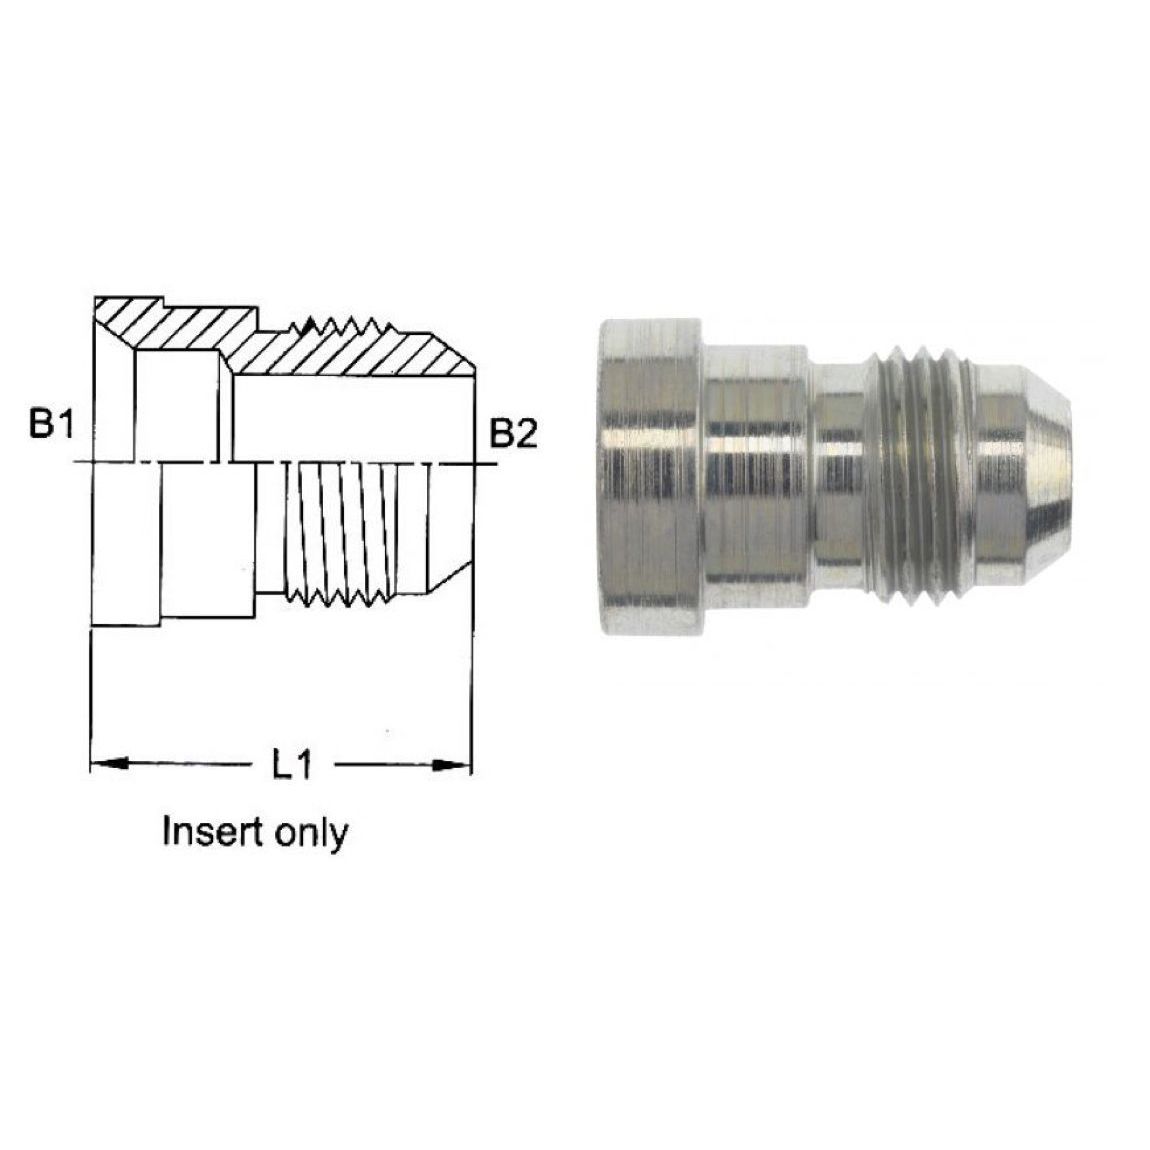 2406-20-04-IN-SS : OneHydraulics Straight Reducer Insert Only, 1.25 (1-1/4) Female JIC x 0.25 (1/4) Male JIC, Stainless Steel, 4800psi